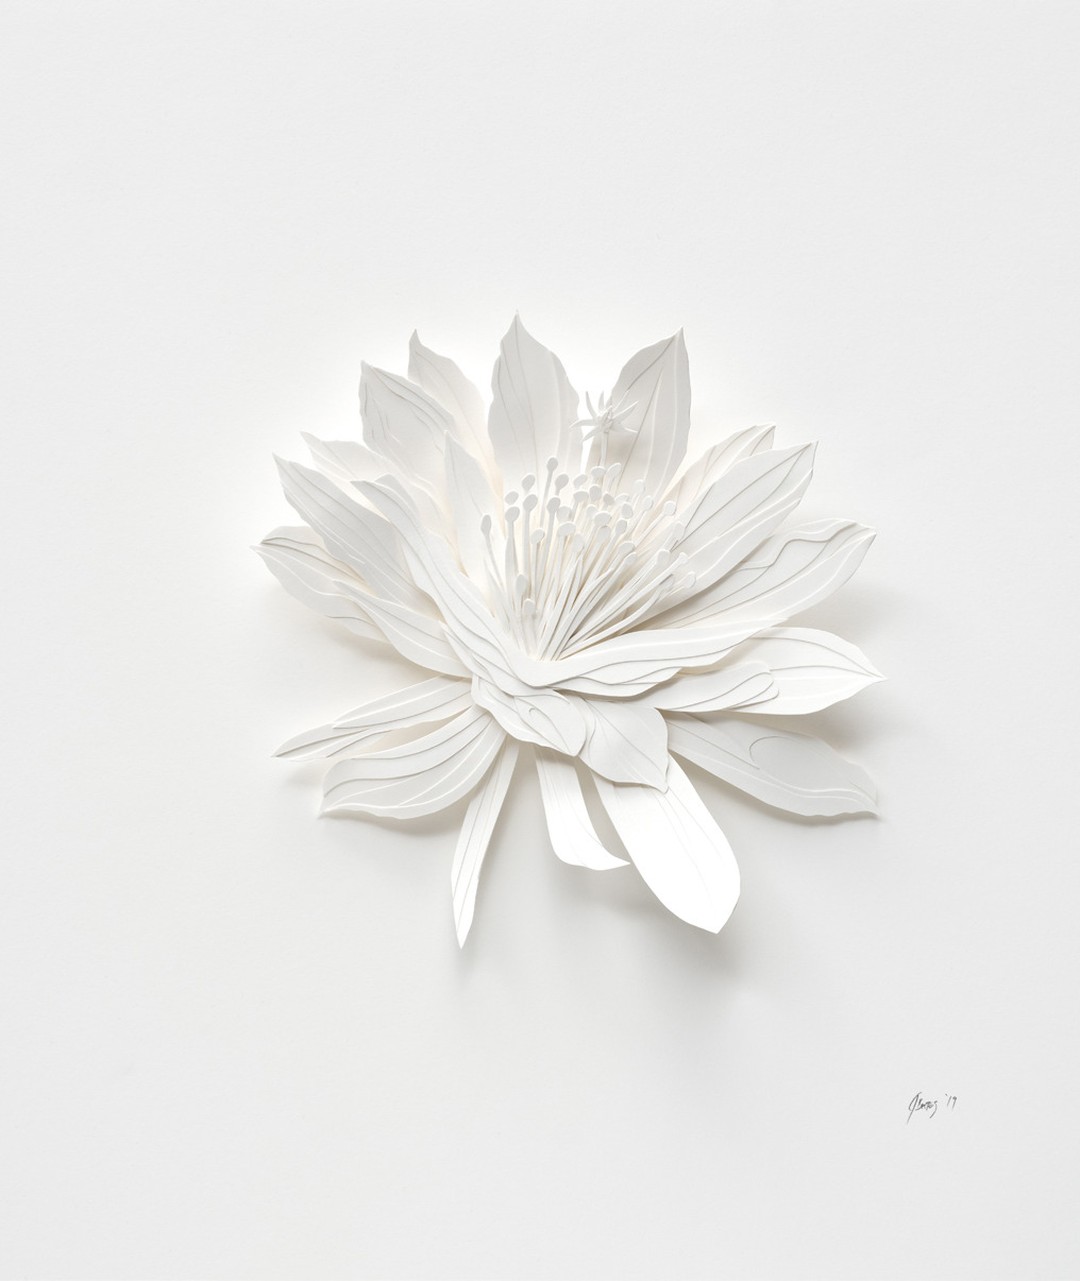 Gorgeously Intricate Floral Paper Cutting Sculptures By Joey Bates (11)